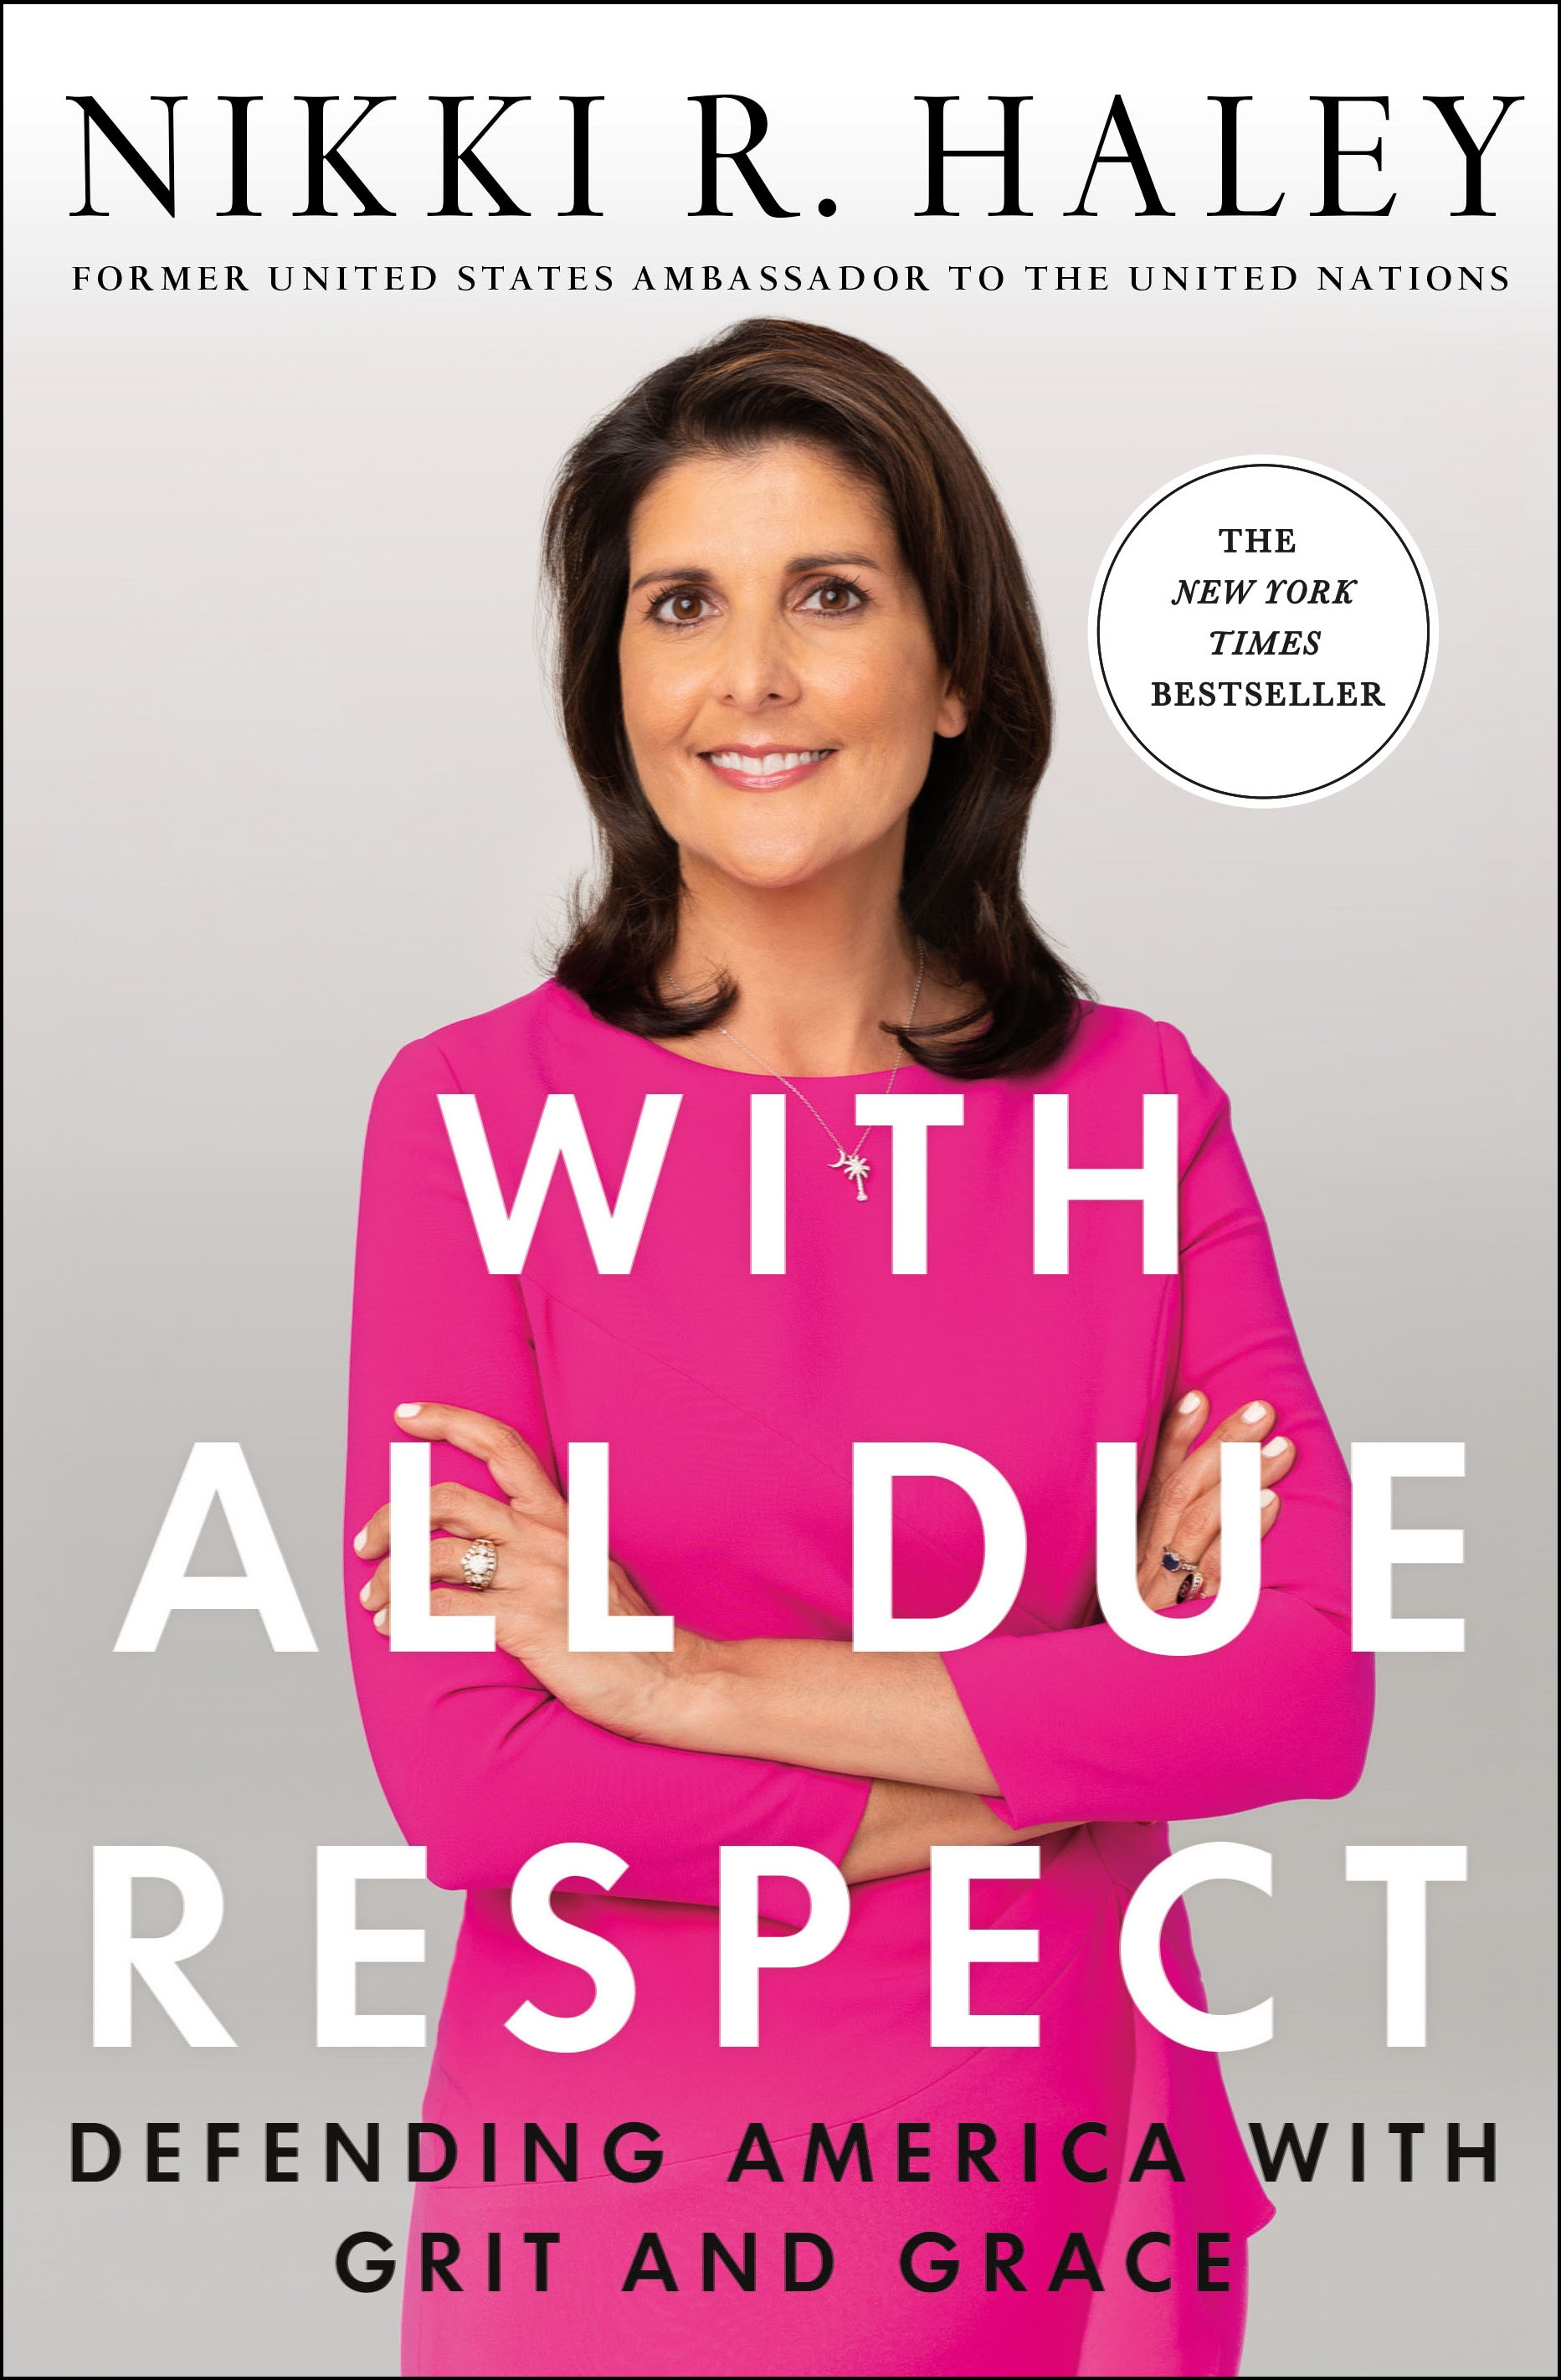 Book “With All Due Respect” by Nikki R. Haley — November 12, 2019